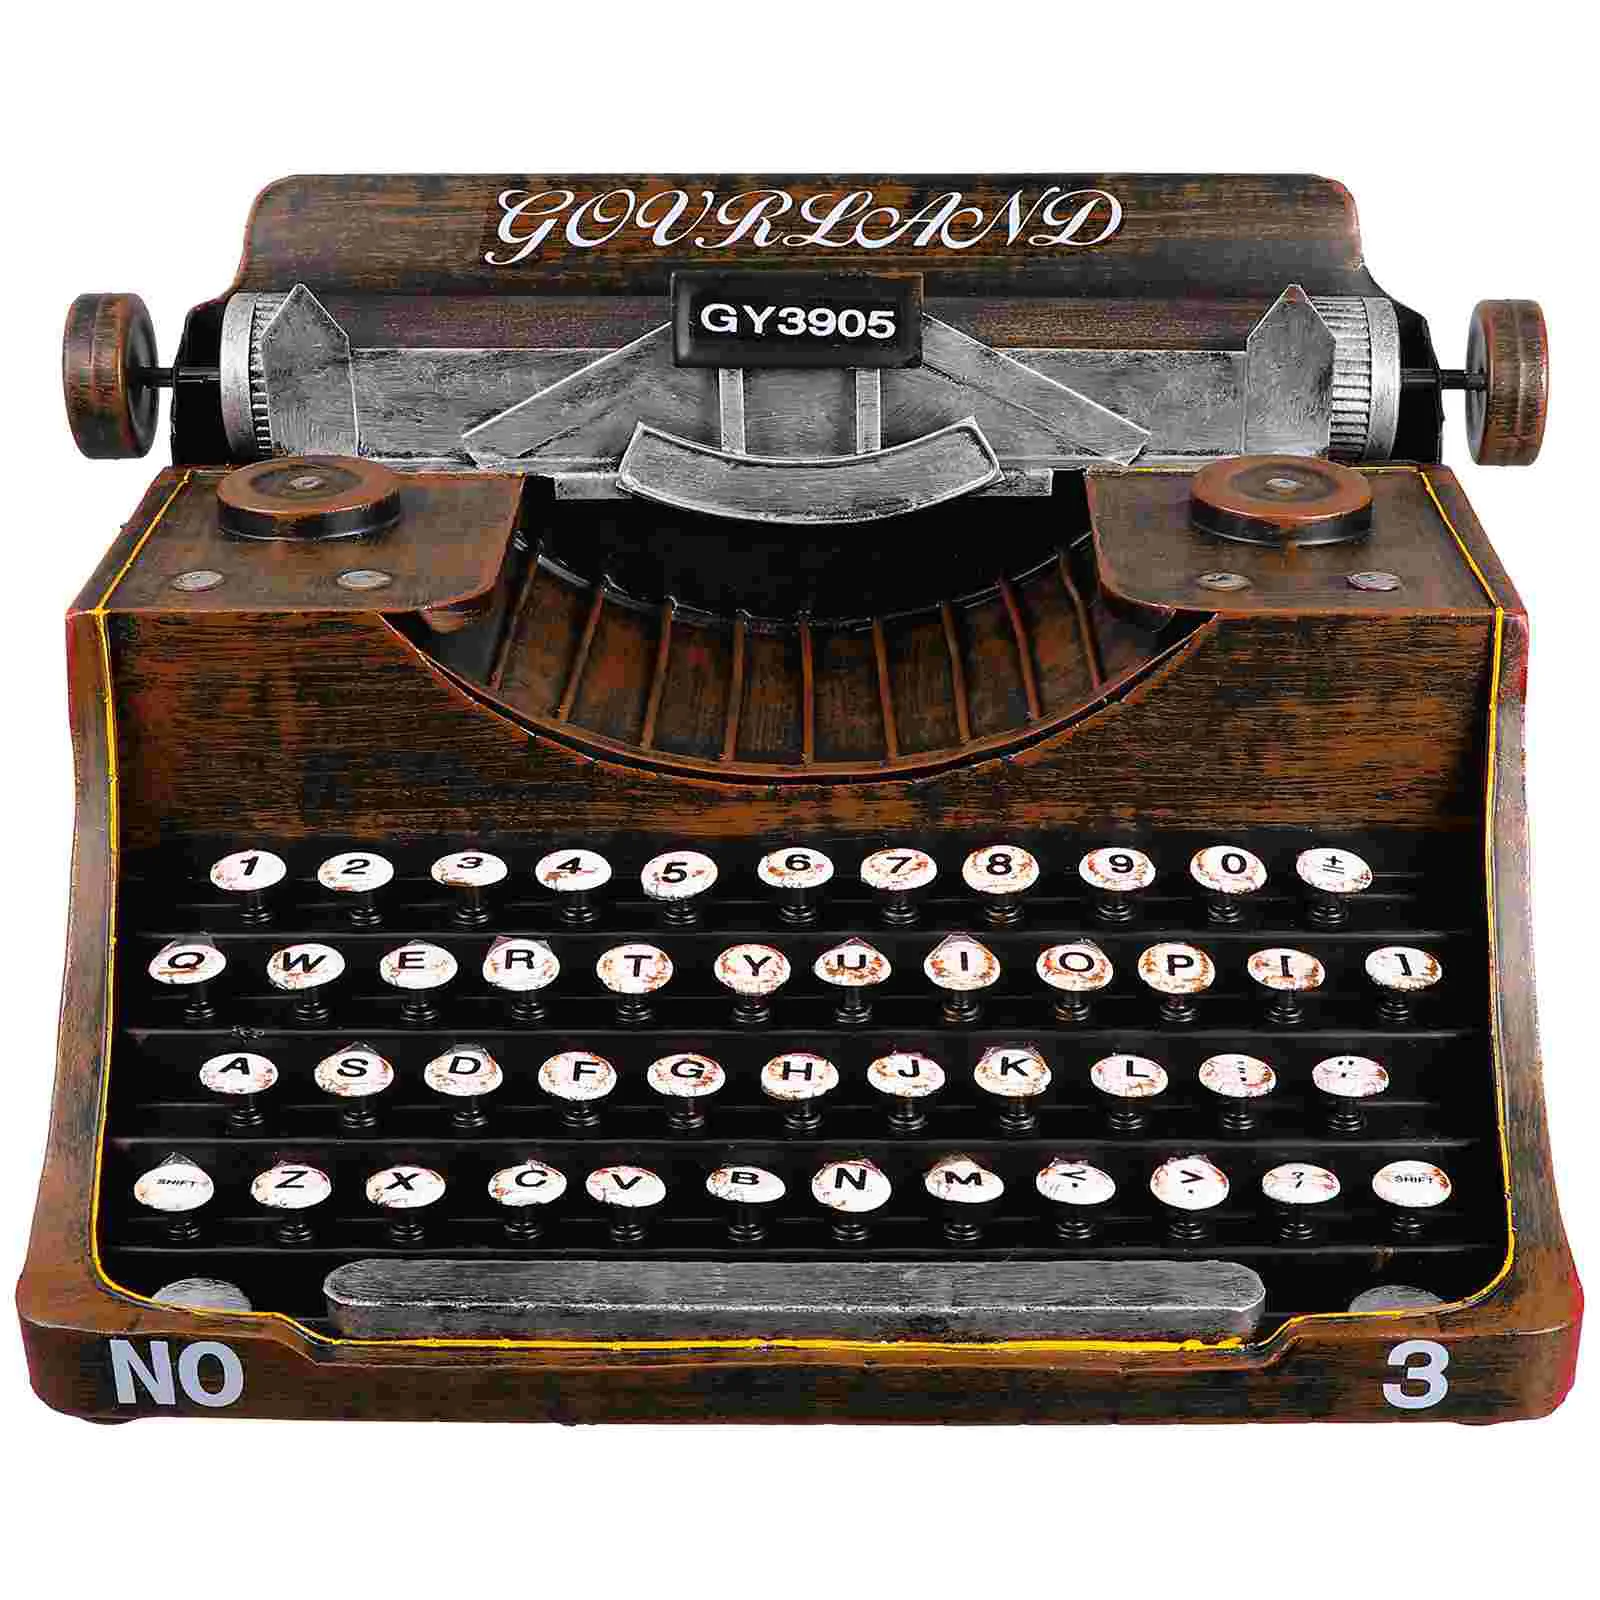 

Home Decor Crafts Manual Typewriter Model Photo Prop Wrought Iron Cabinet Ornament Retro Child